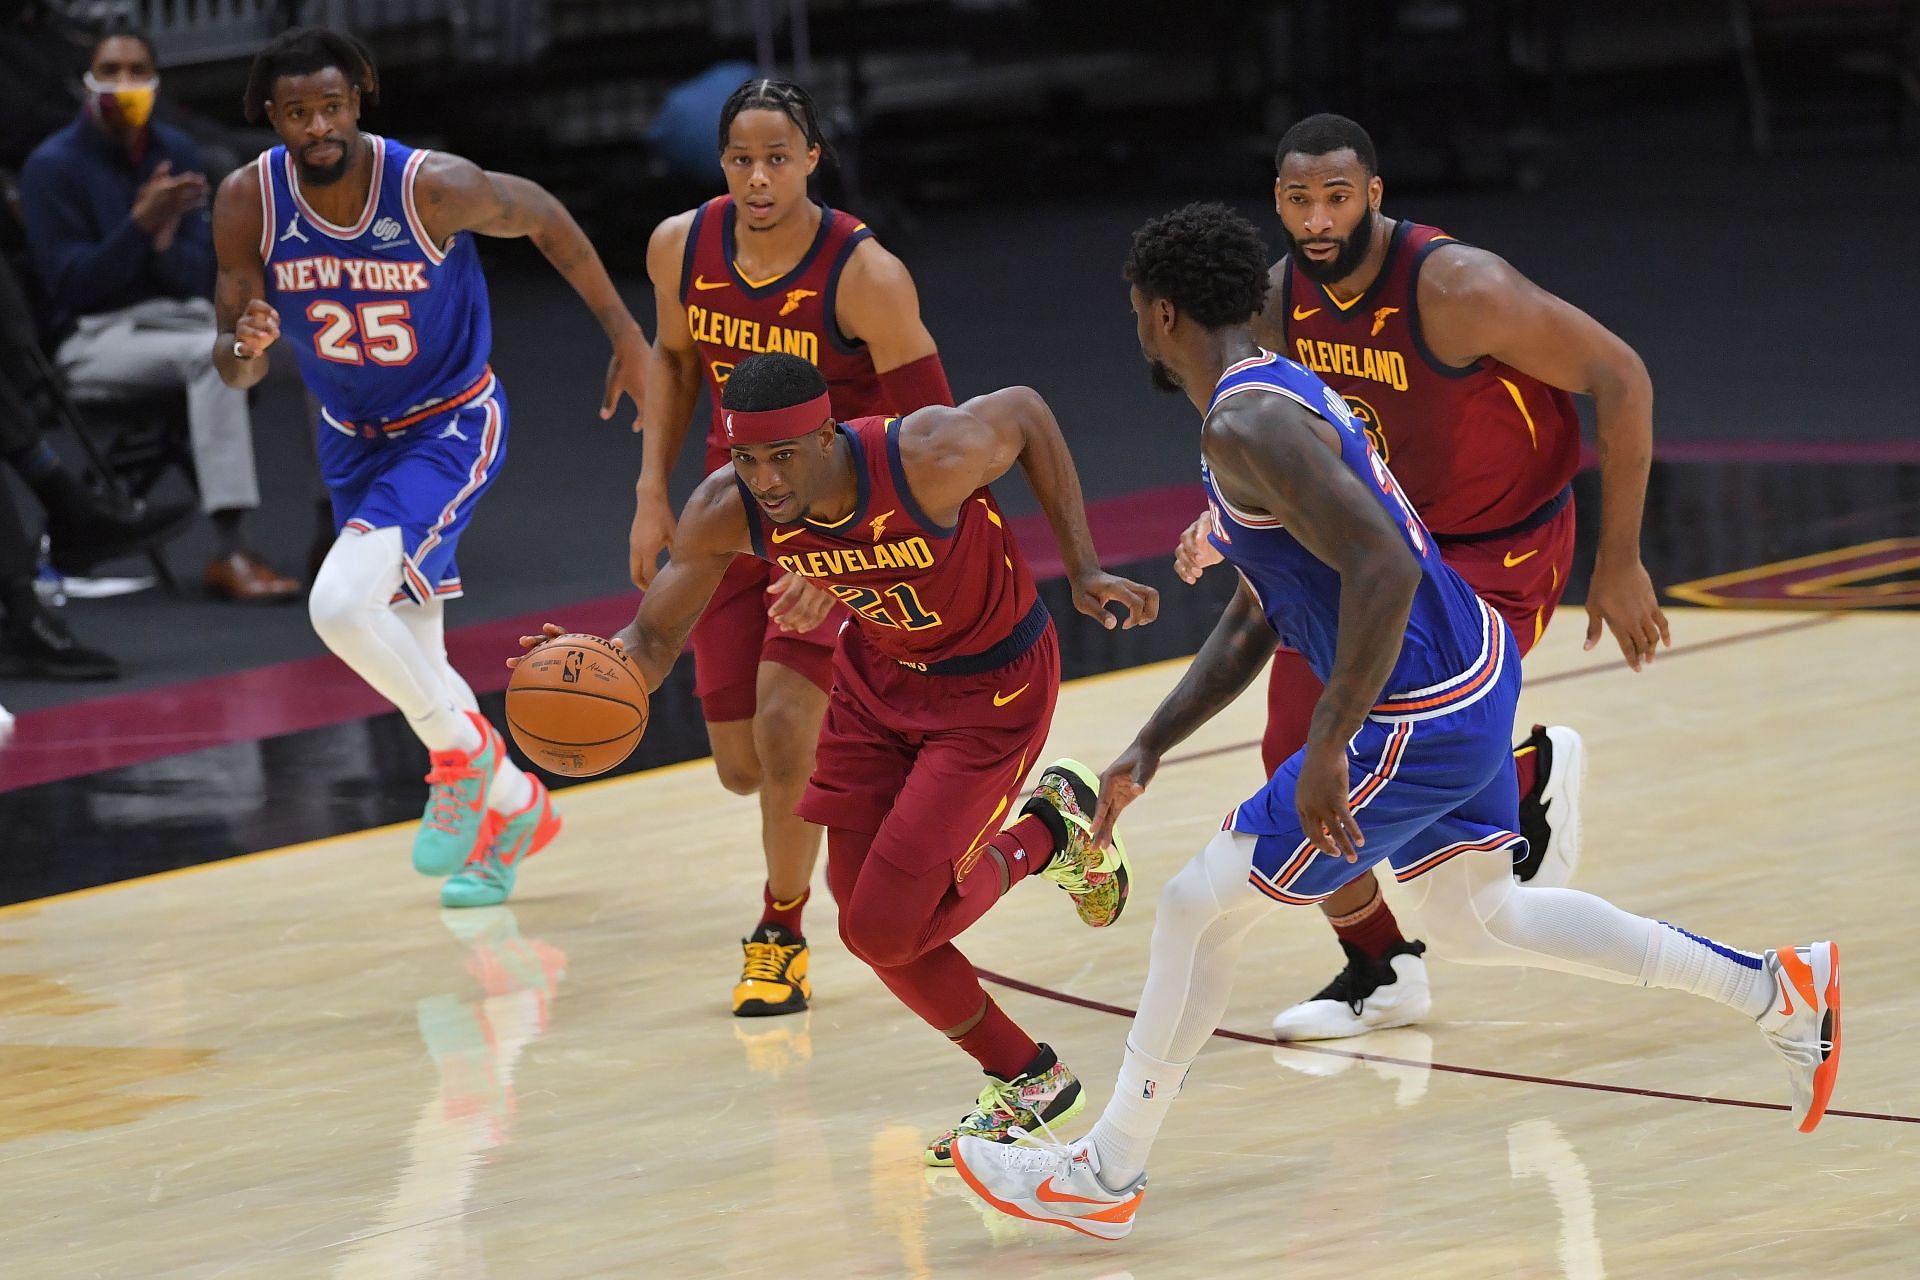 Eastern Conference sides Cleveland Cavaliers will face the New York Knicks